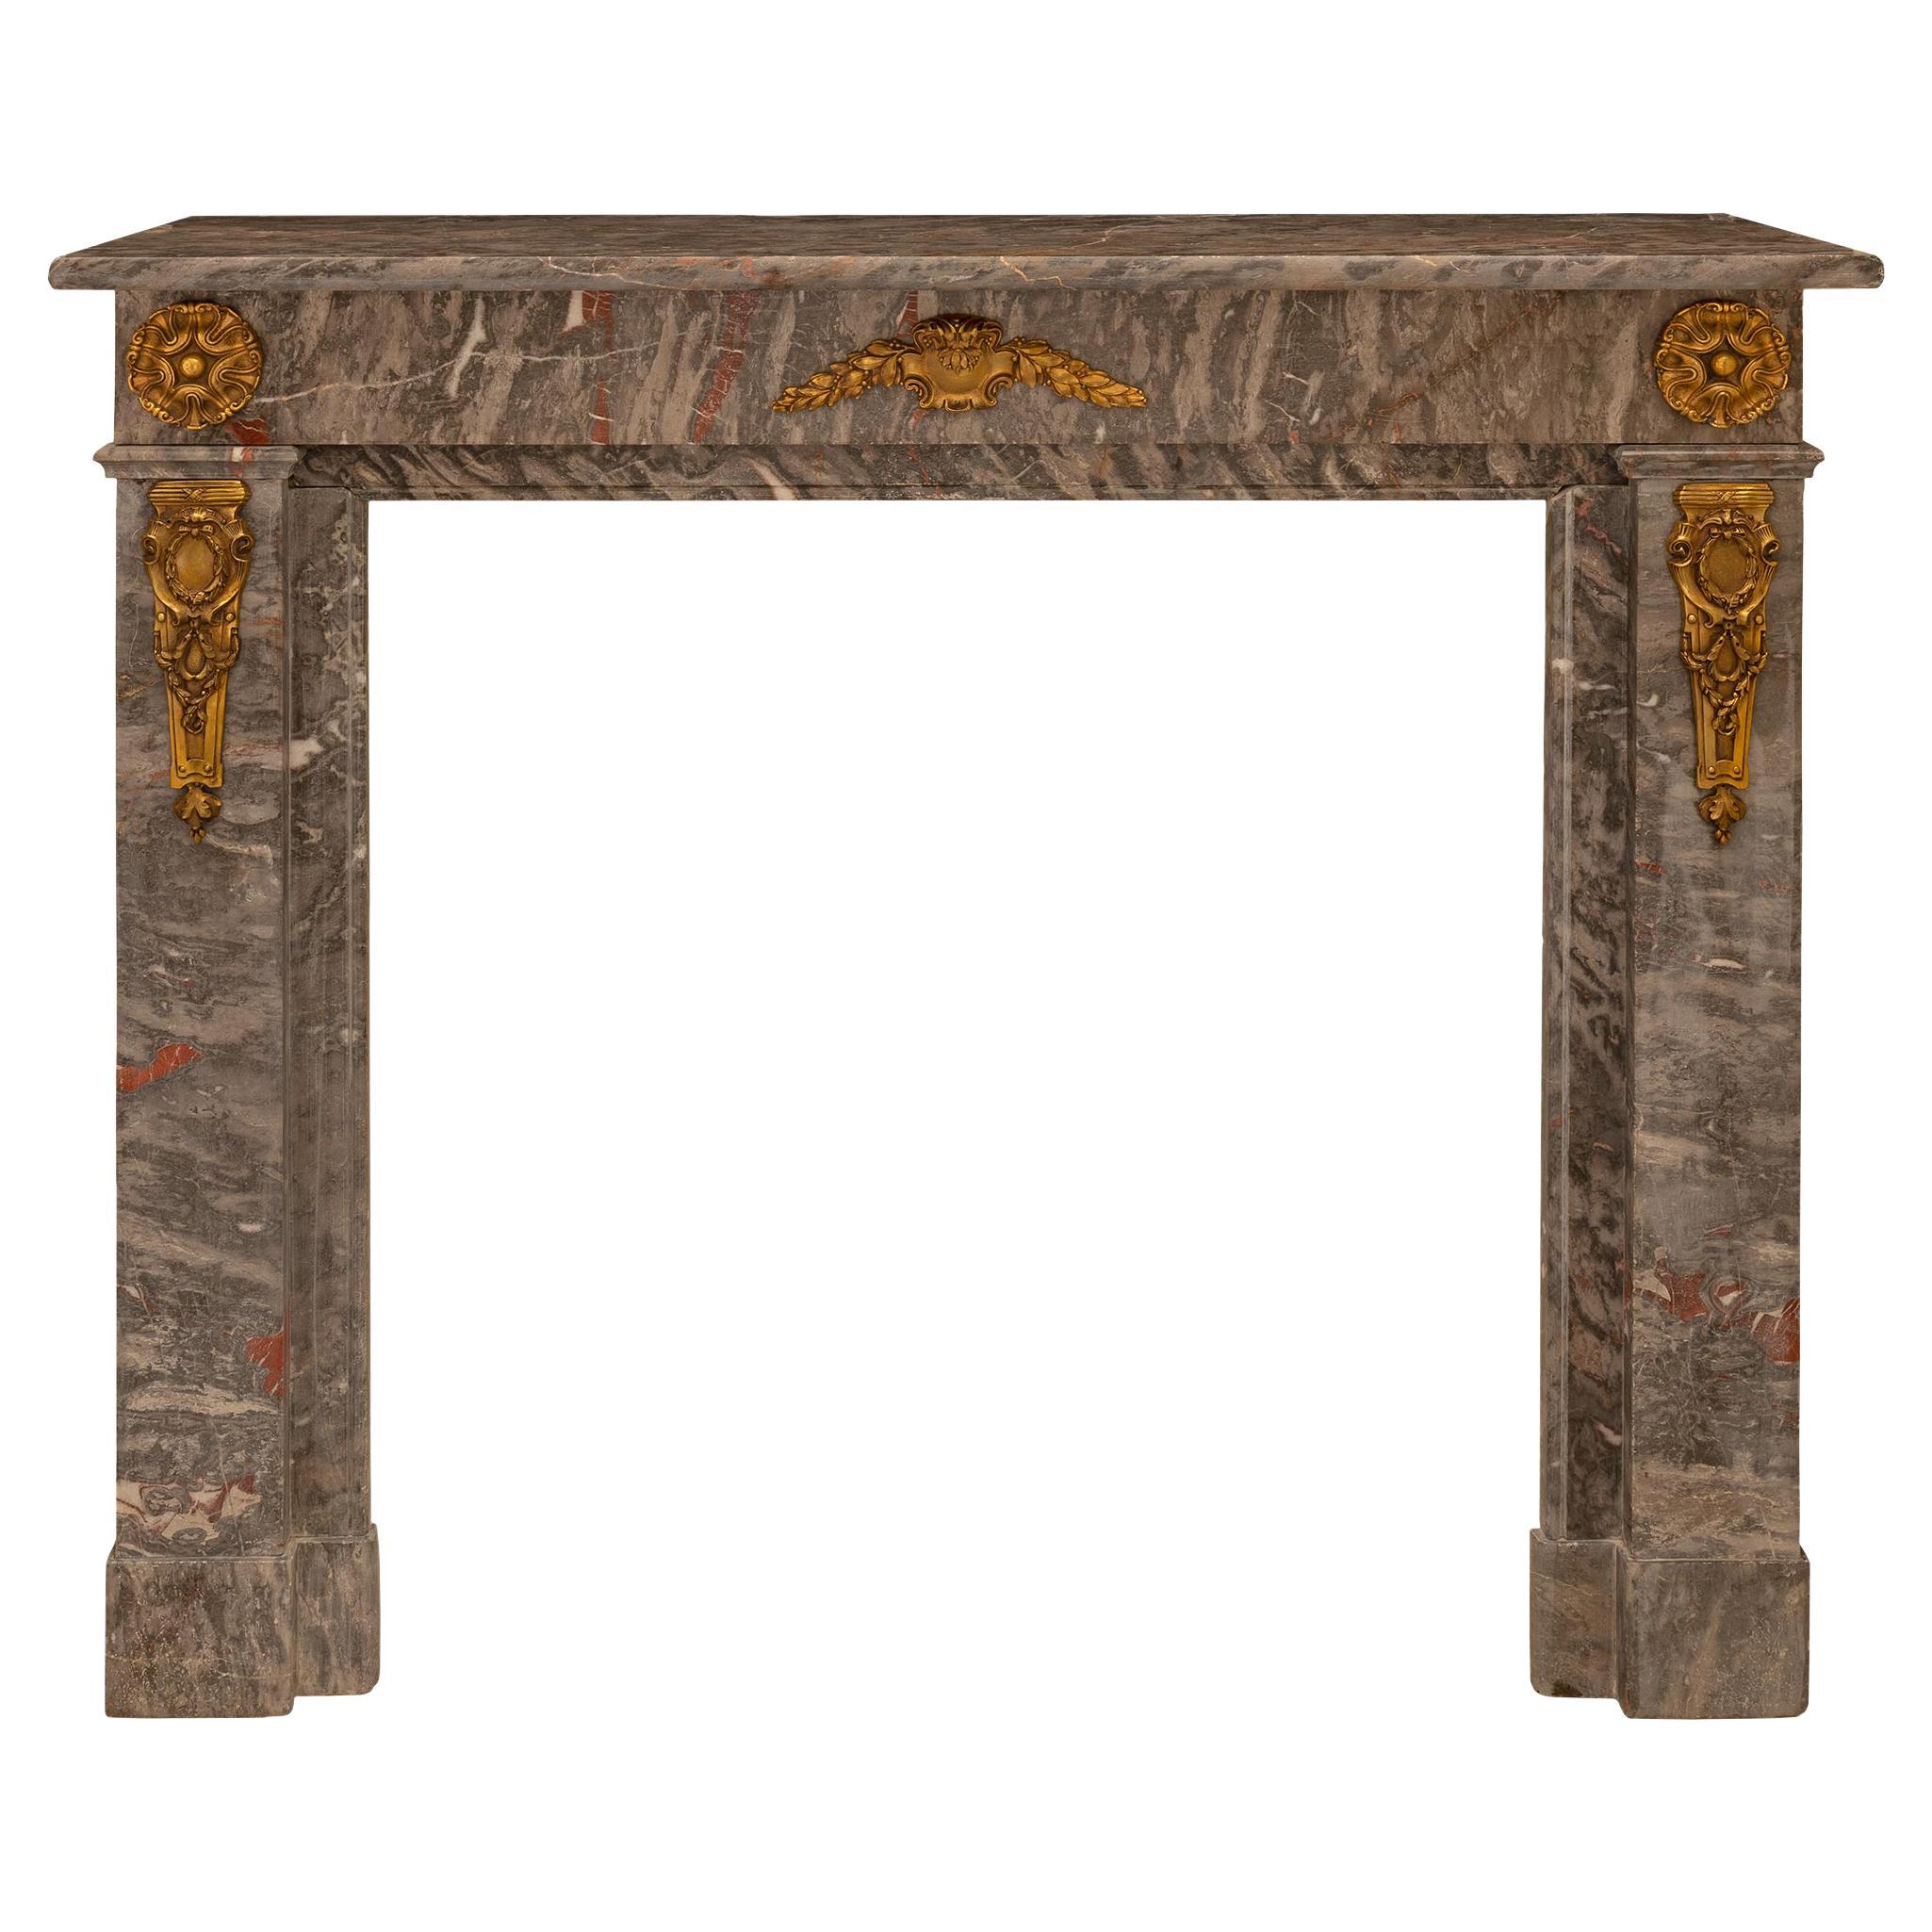 French Louis XVI Style Marble and Ormolu-Mounted Mantel